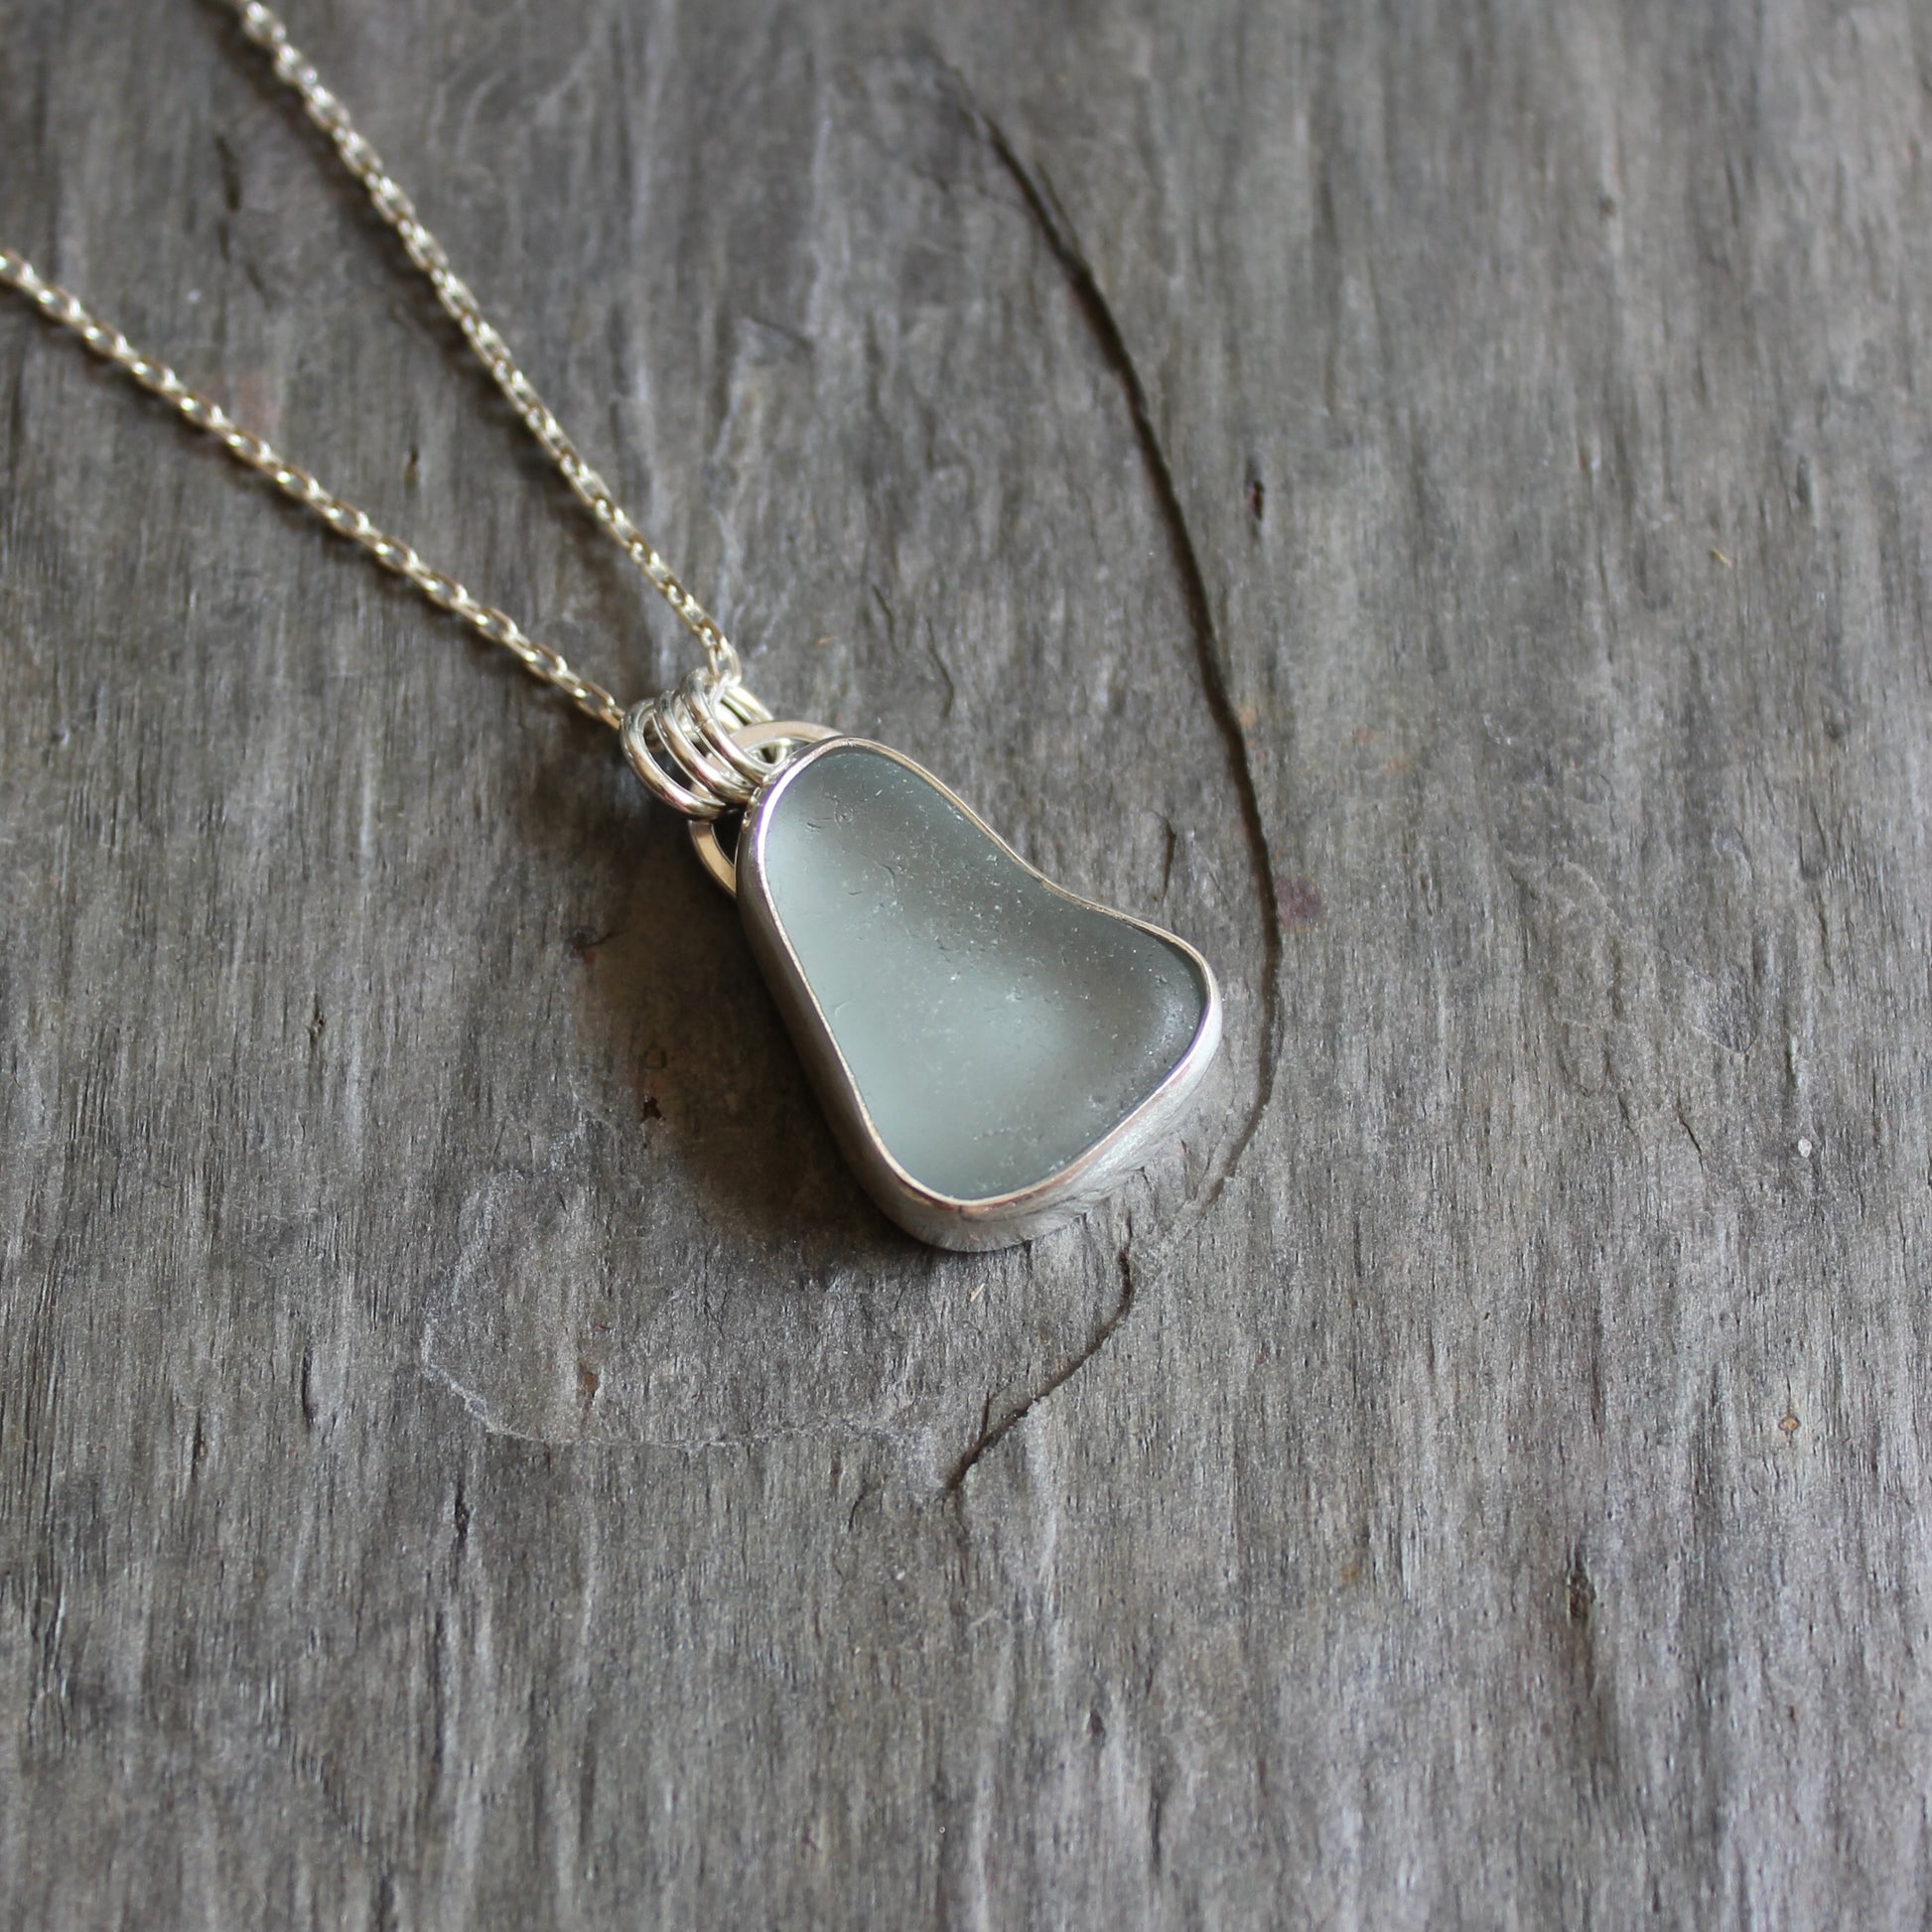 This pendant has a chunky piece of gray sea glass and it is set in a fine and sterling silver bezel setting with an 18" chain.  